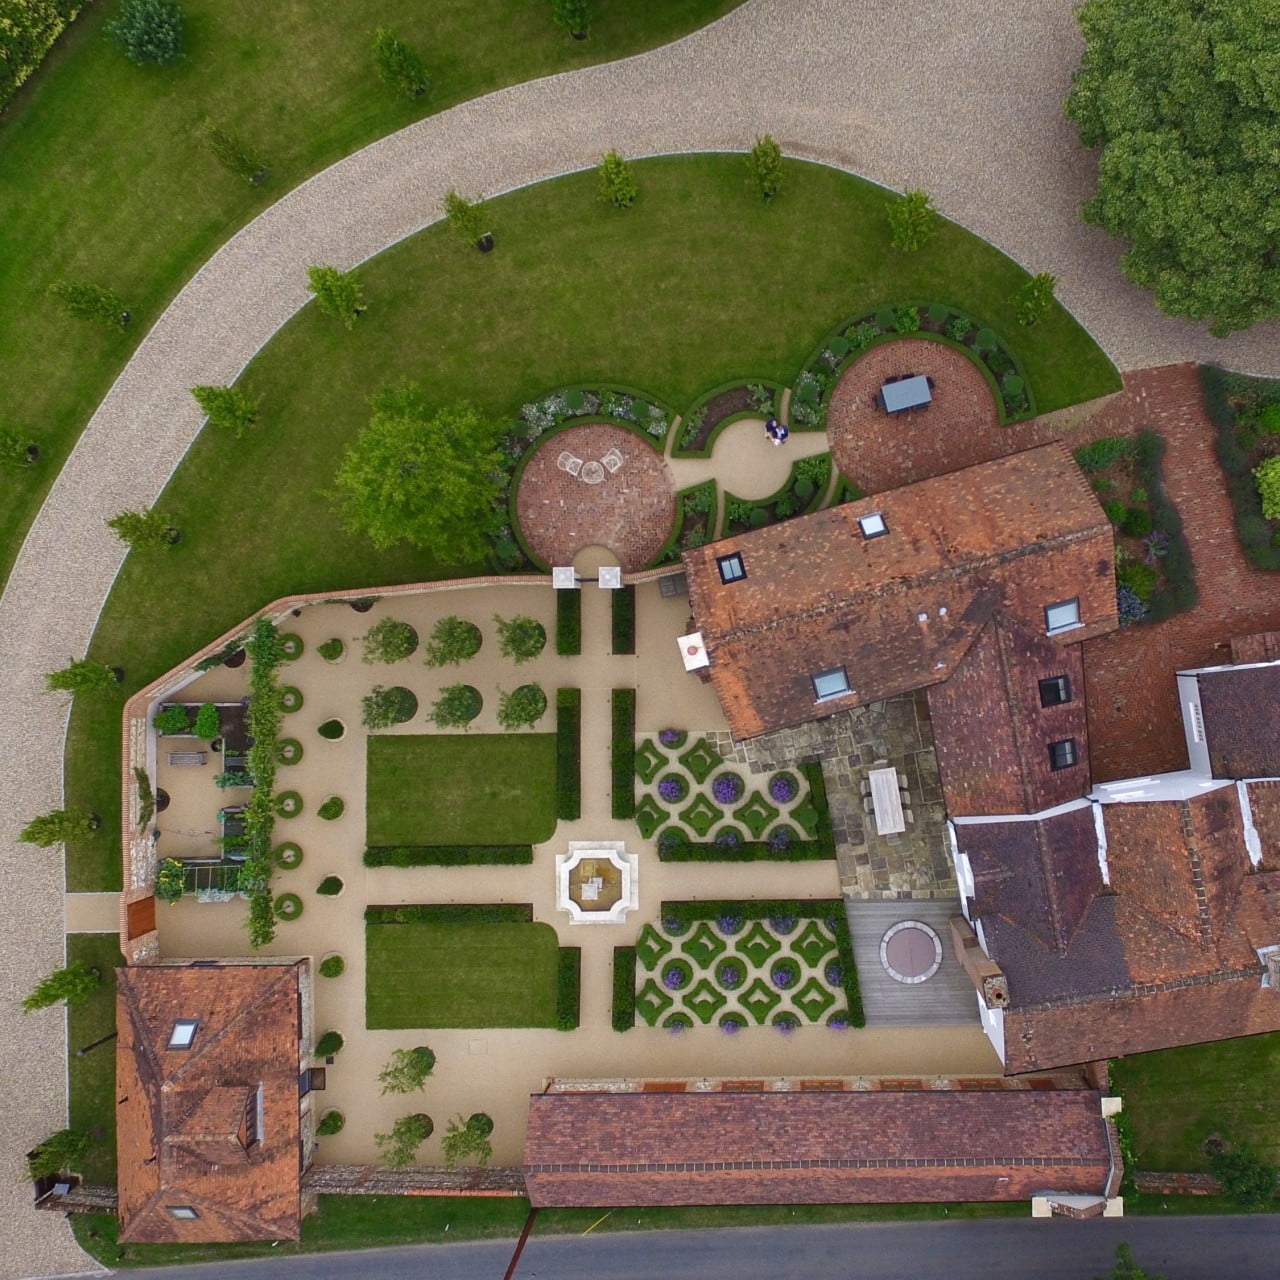 Here is a view from the sky of the walled garden near Henley on Thames